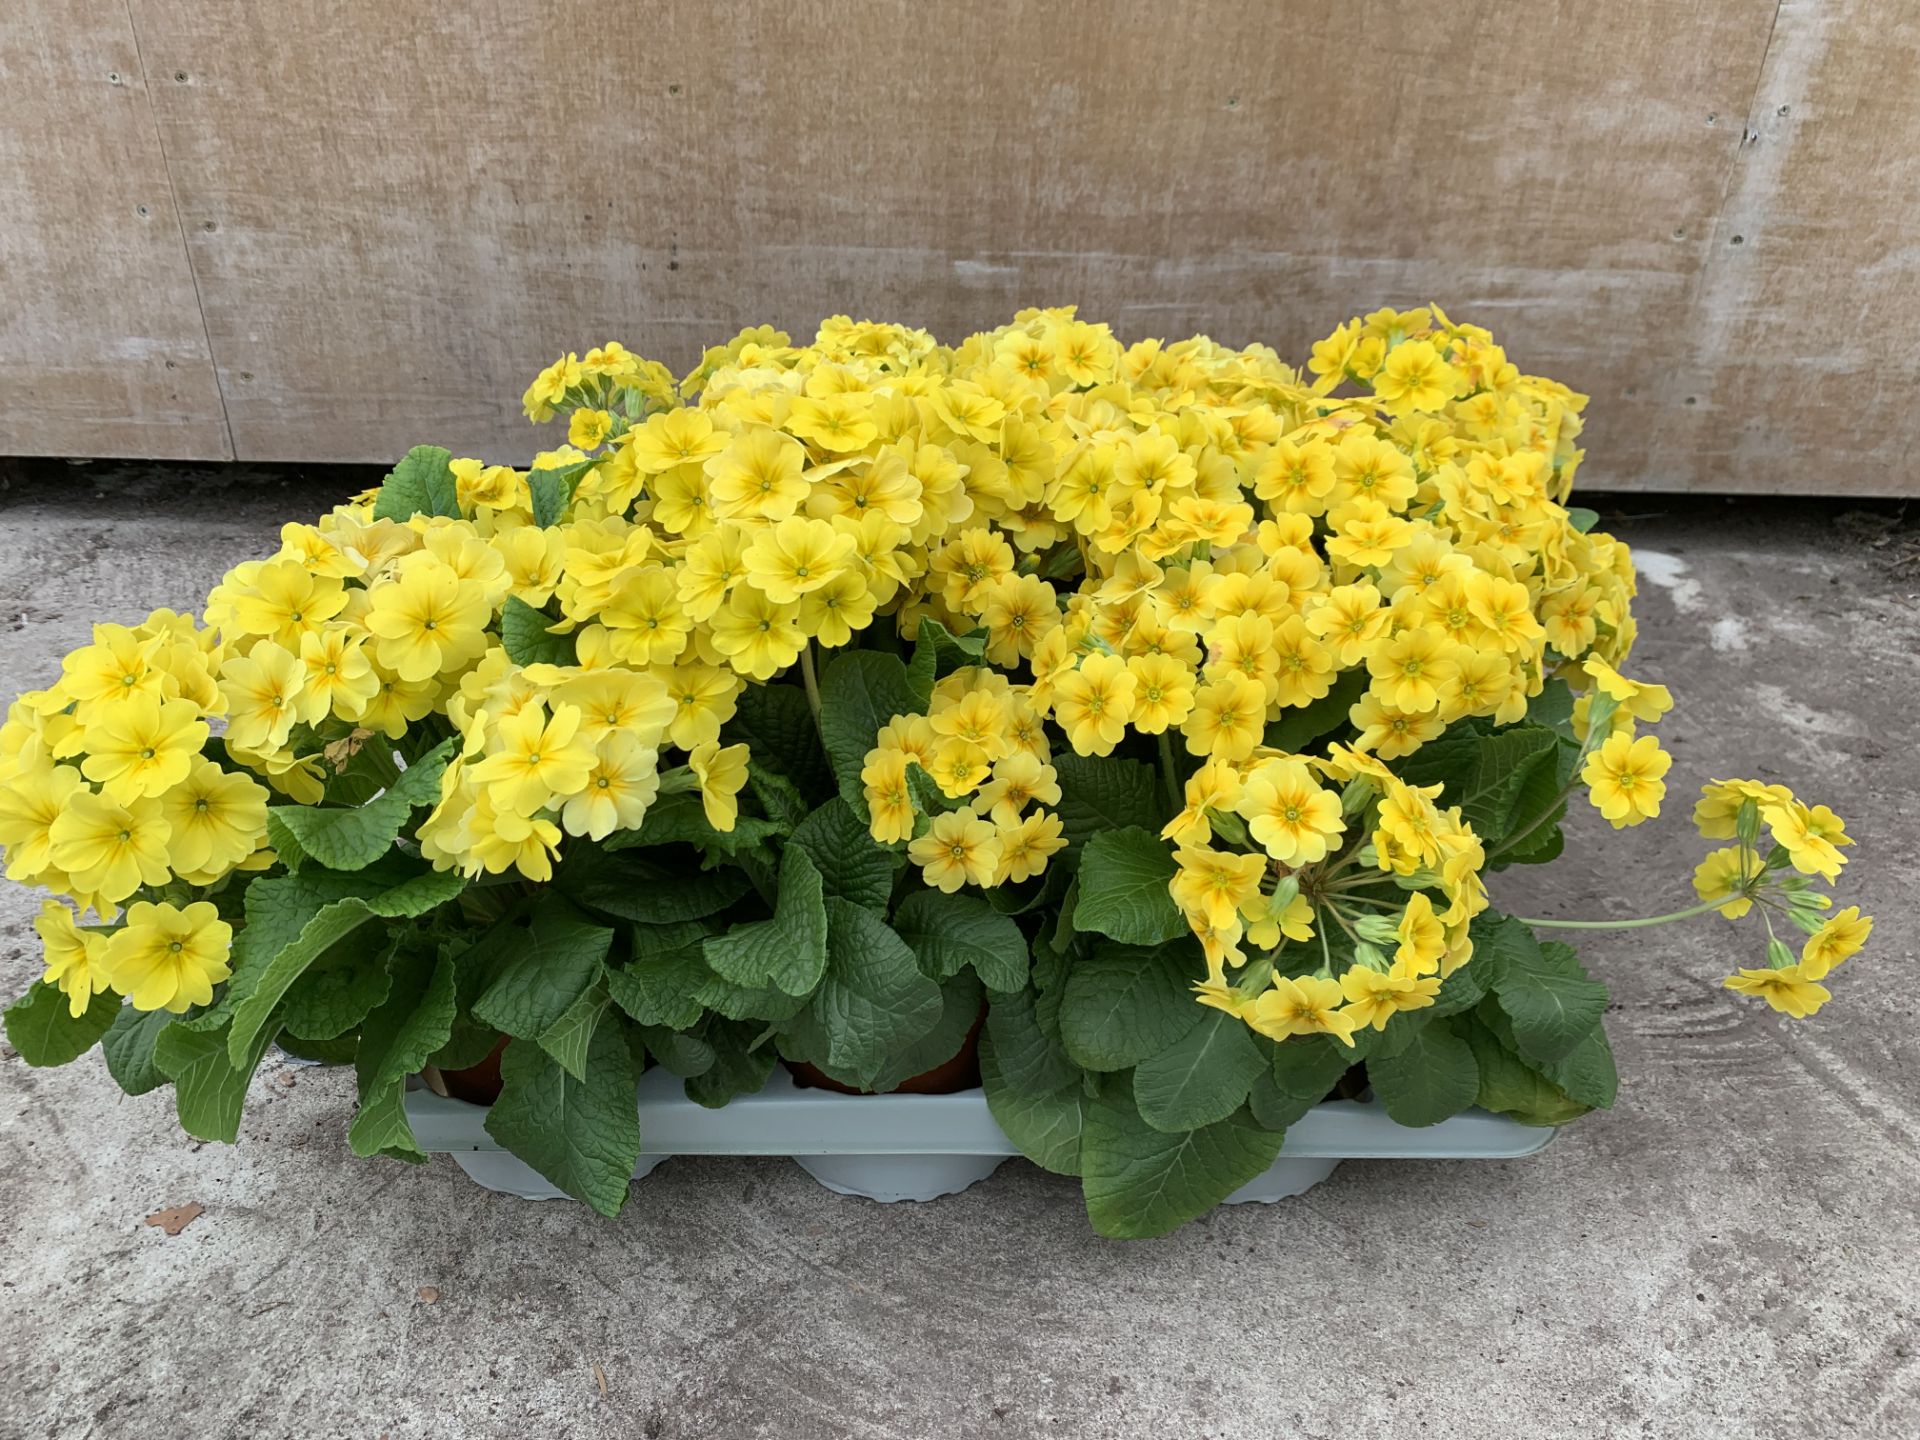 SIX GOLDEN NUGGET SCENTED YELLOW POLYANTHUS PLUS VAT TO BE SOLD FOR THE SIX - Bild 3 aus 4